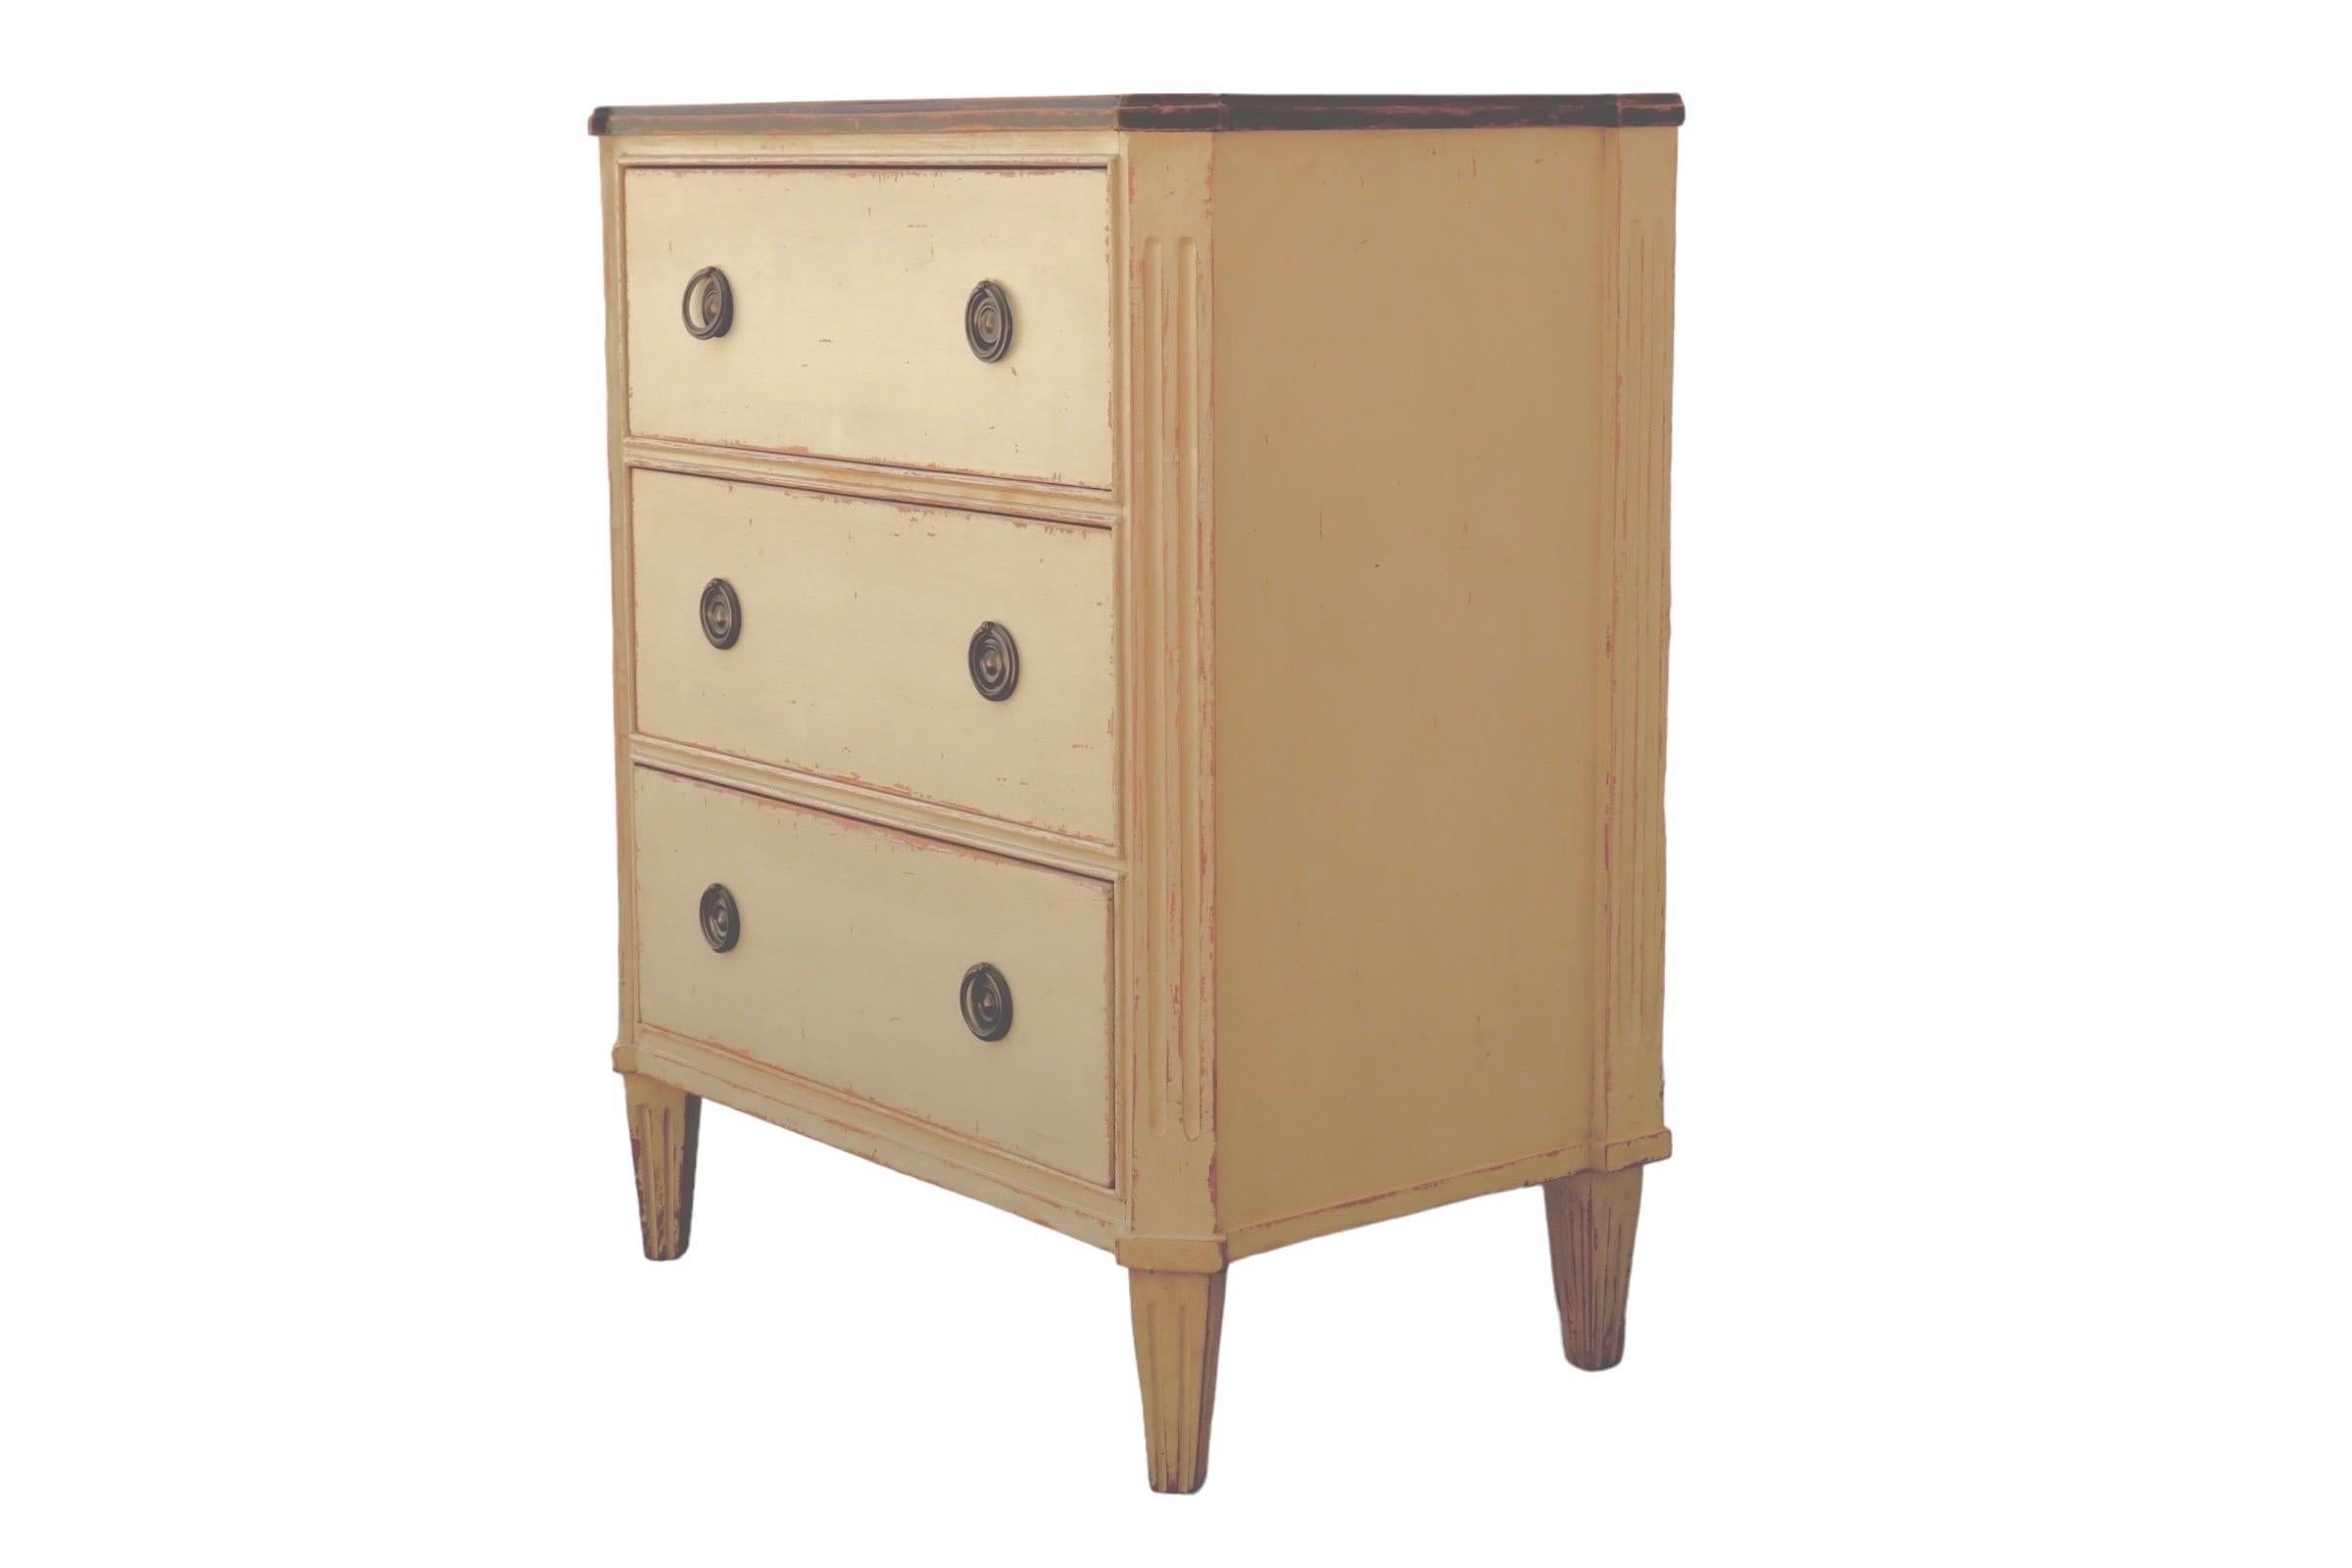 A Lillian August small bureau. Three hand dovetailed drawers open with round metal handles against round beveled backplates. The top drawer is separated into three compartments, and angled fluted corners flank the drawers, giving the piece a French